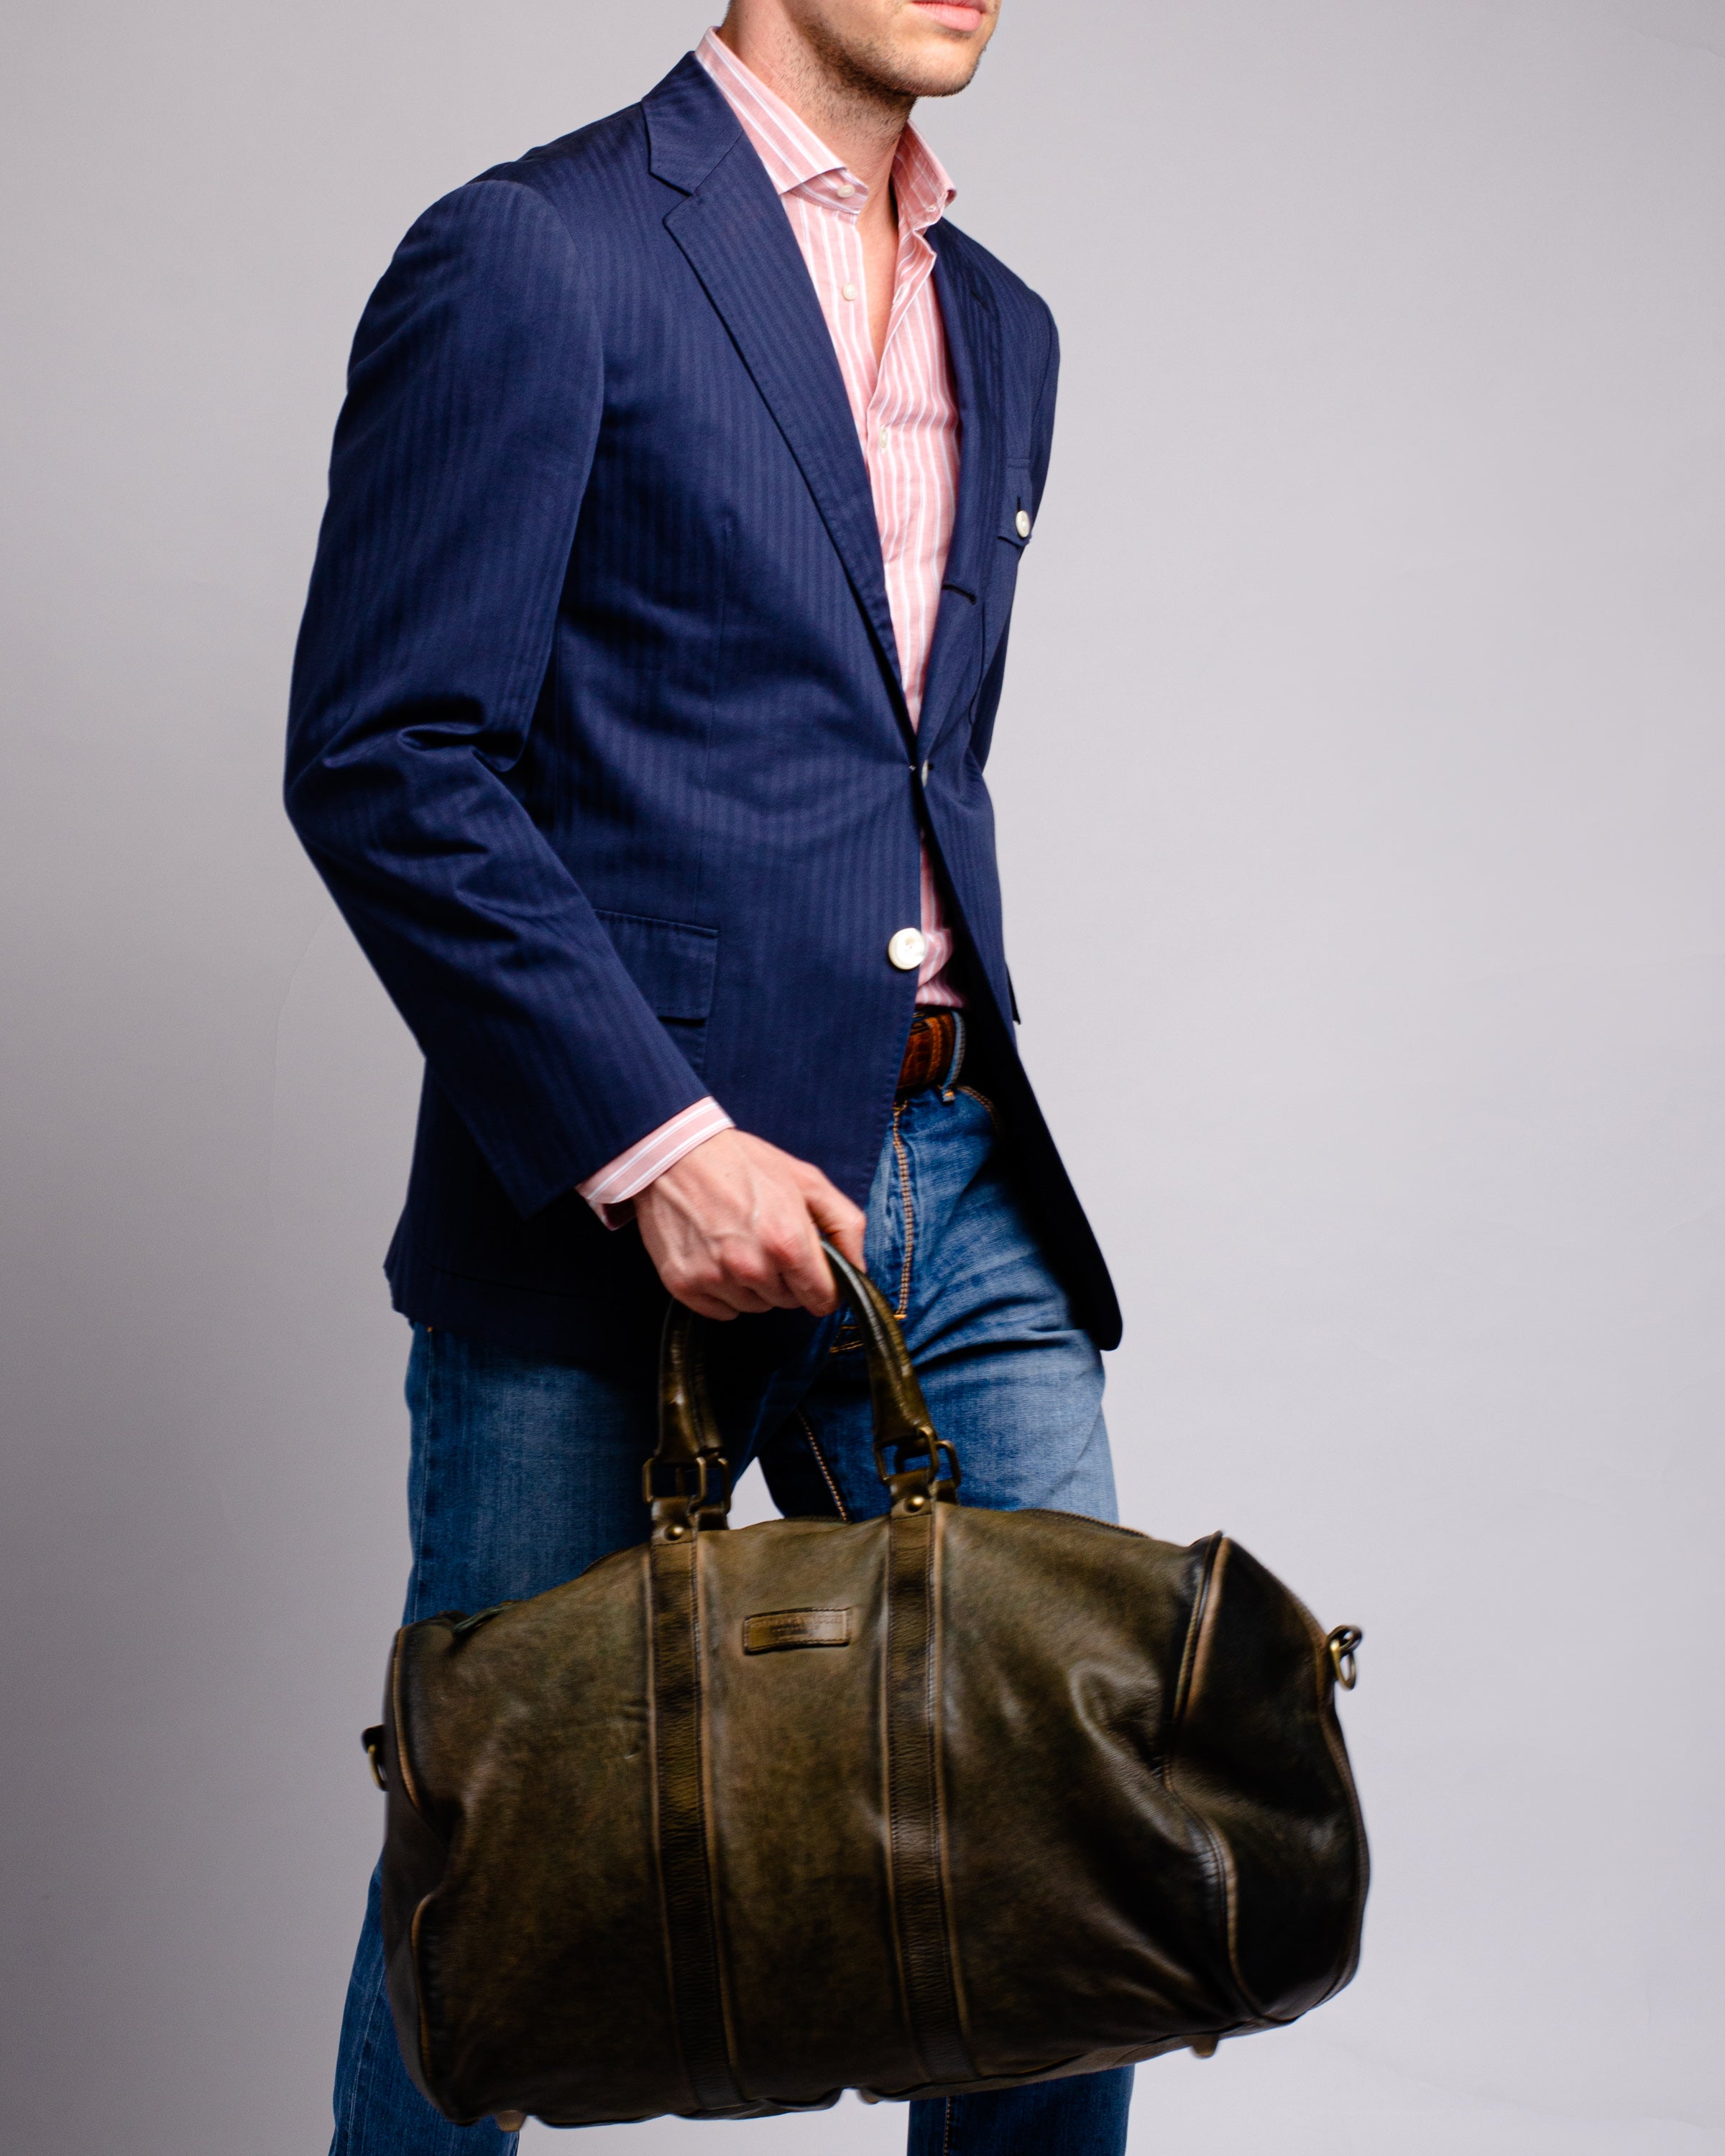 Traveling in Style - How to Pack a Duffel Bag for an Elegant Weekend Away